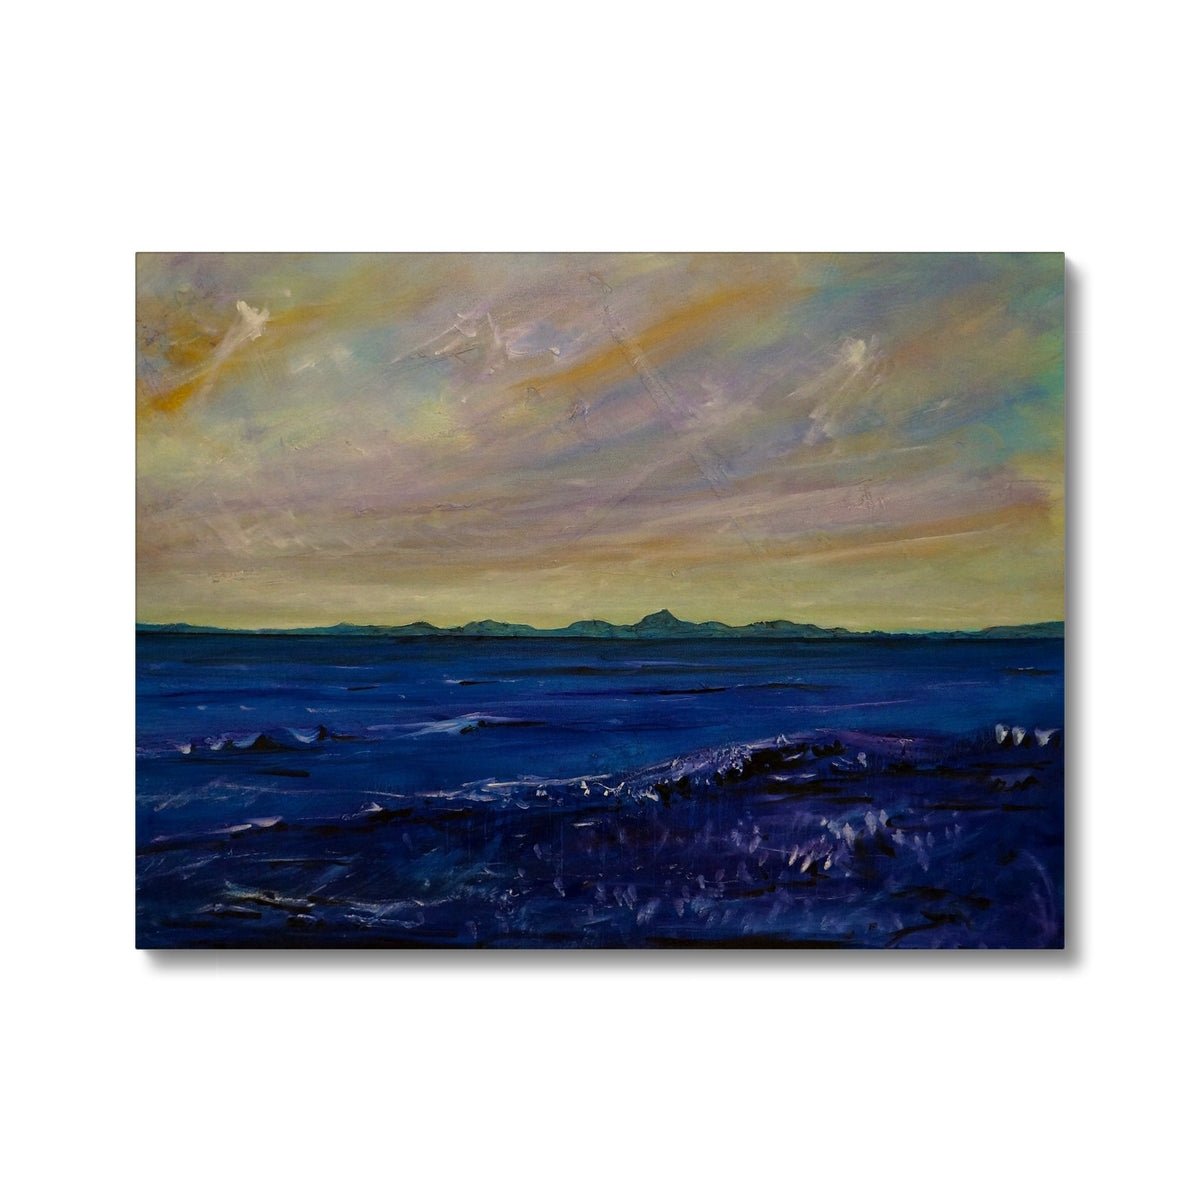 Jura Painting | Canvas From Scotland-Contemporary Stretched Canvas Prints-Hebridean Islands Art Gallery-24"x18"-Paintings, Prints, Homeware, Art Gifts From Scotland By Scottish Artist Kevin Hunter